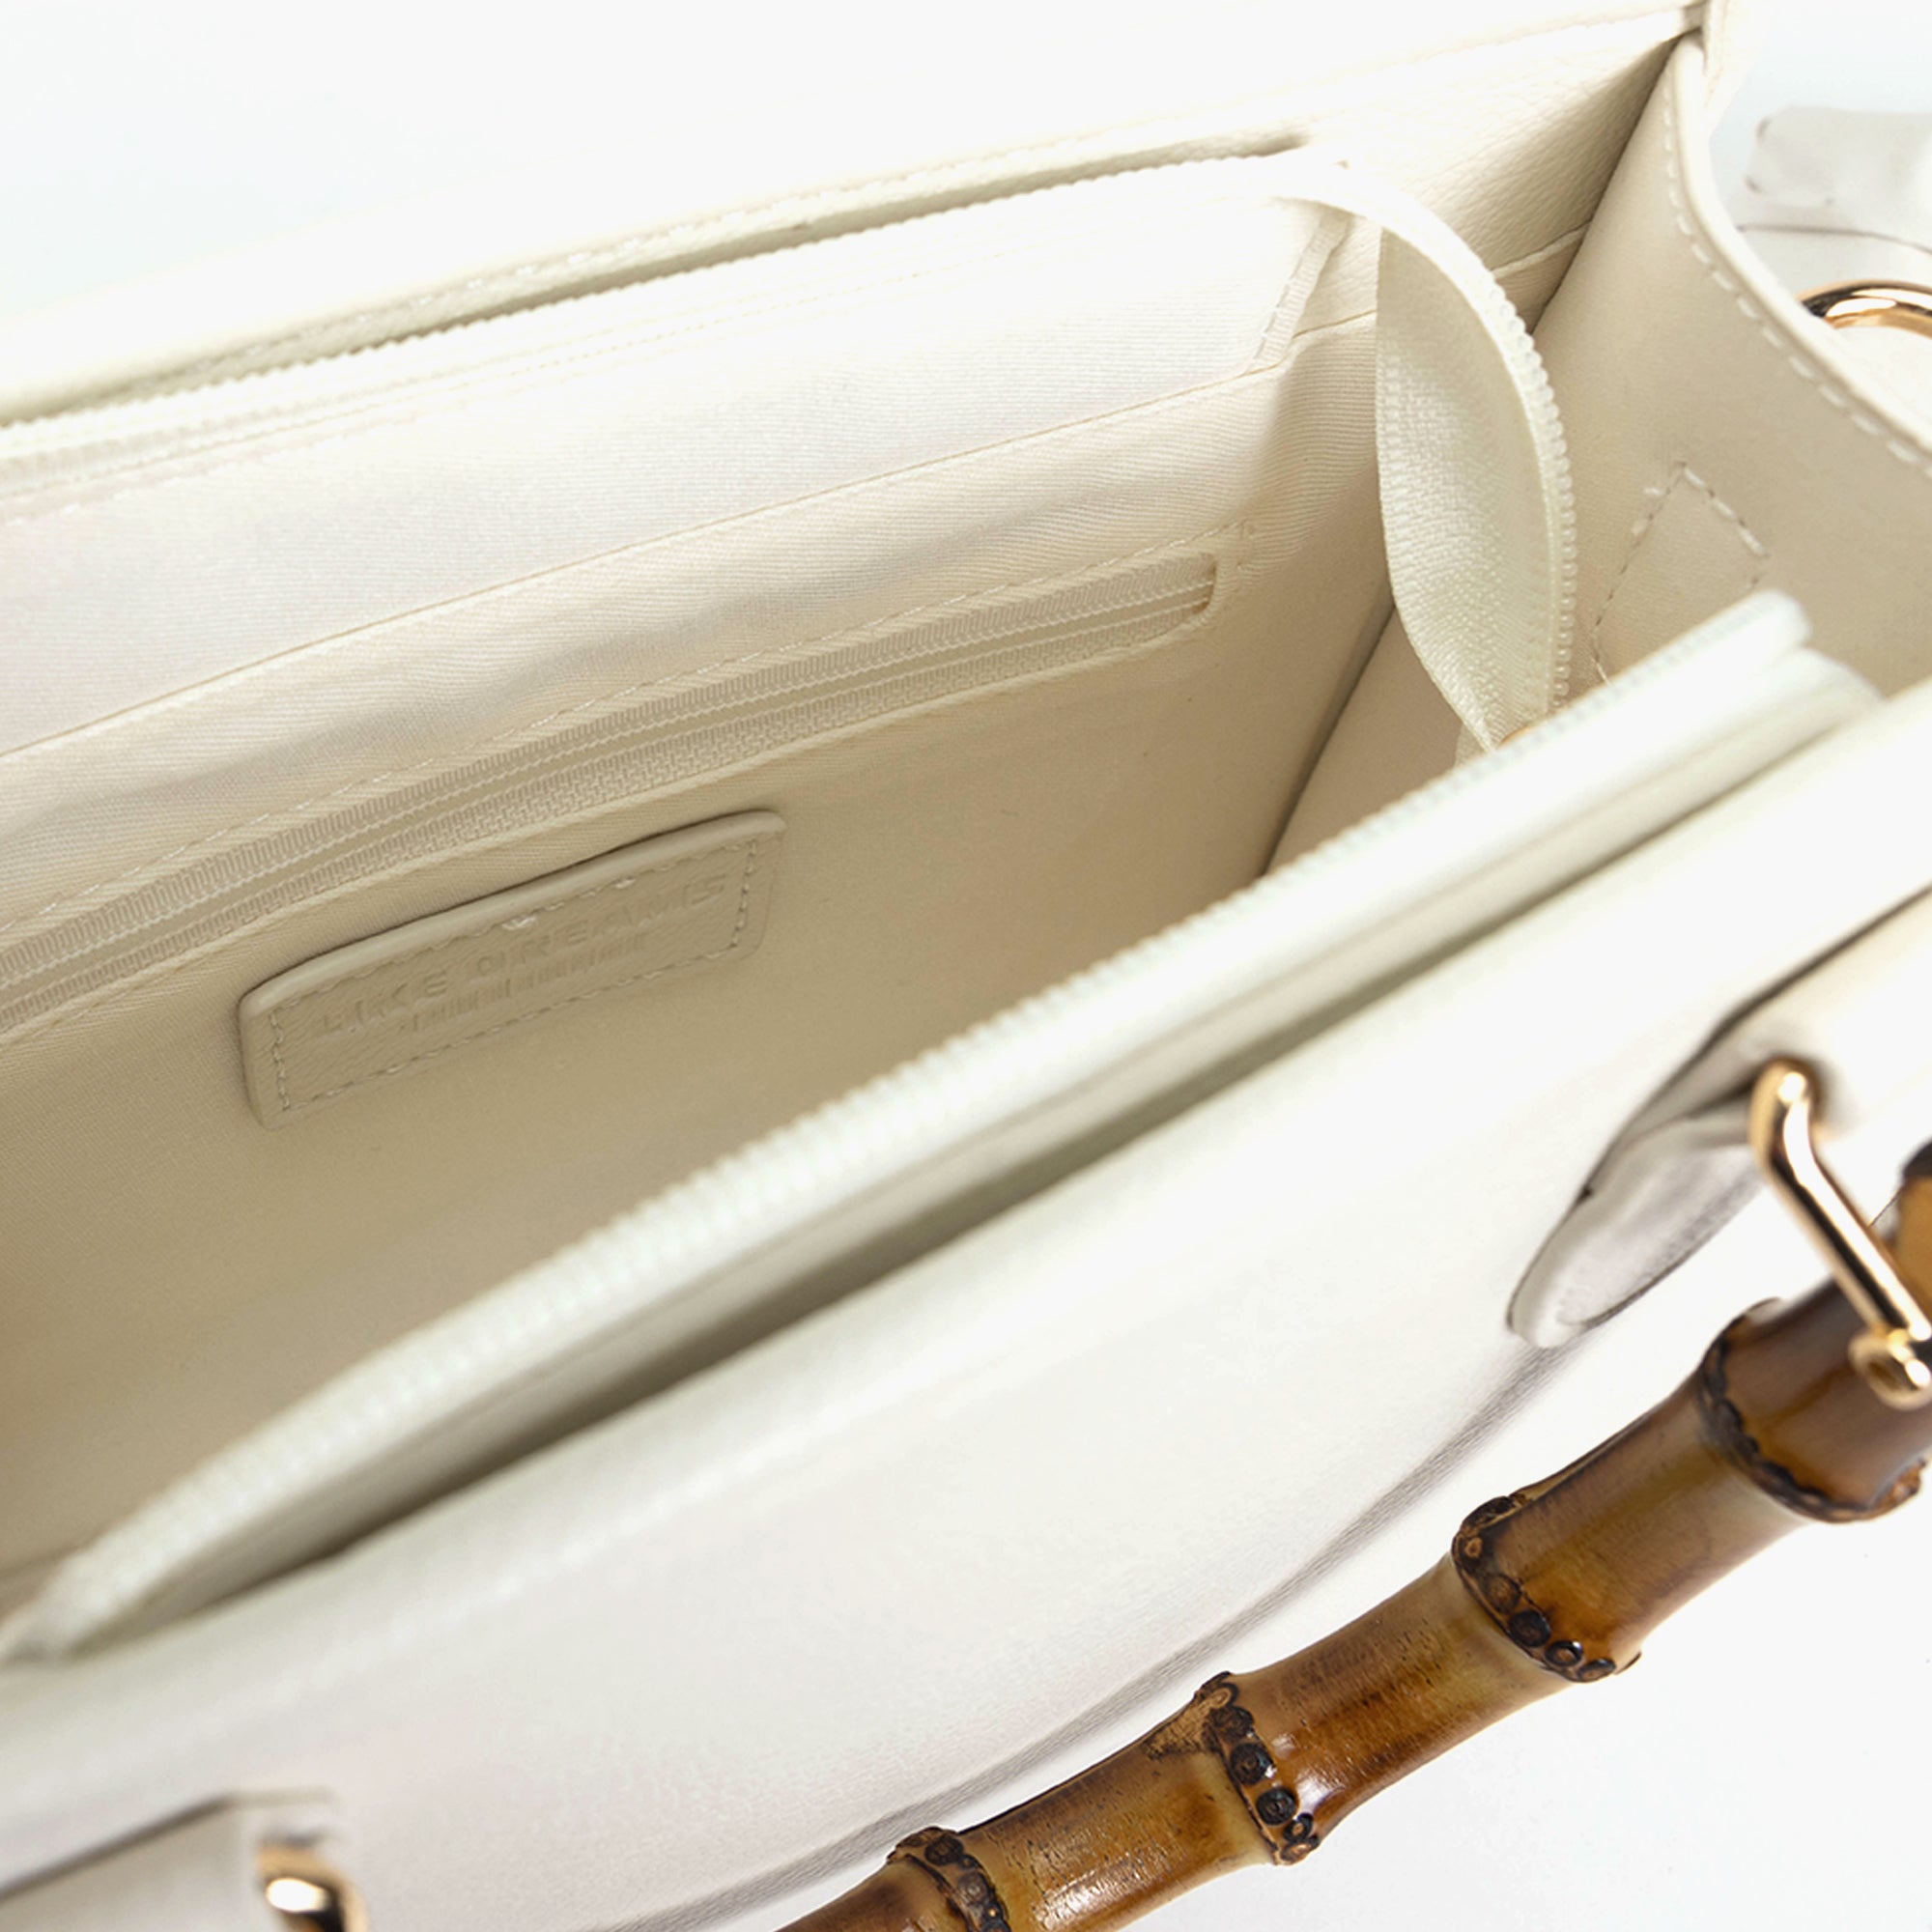 The Kate Wooden Handle Strap Satchel